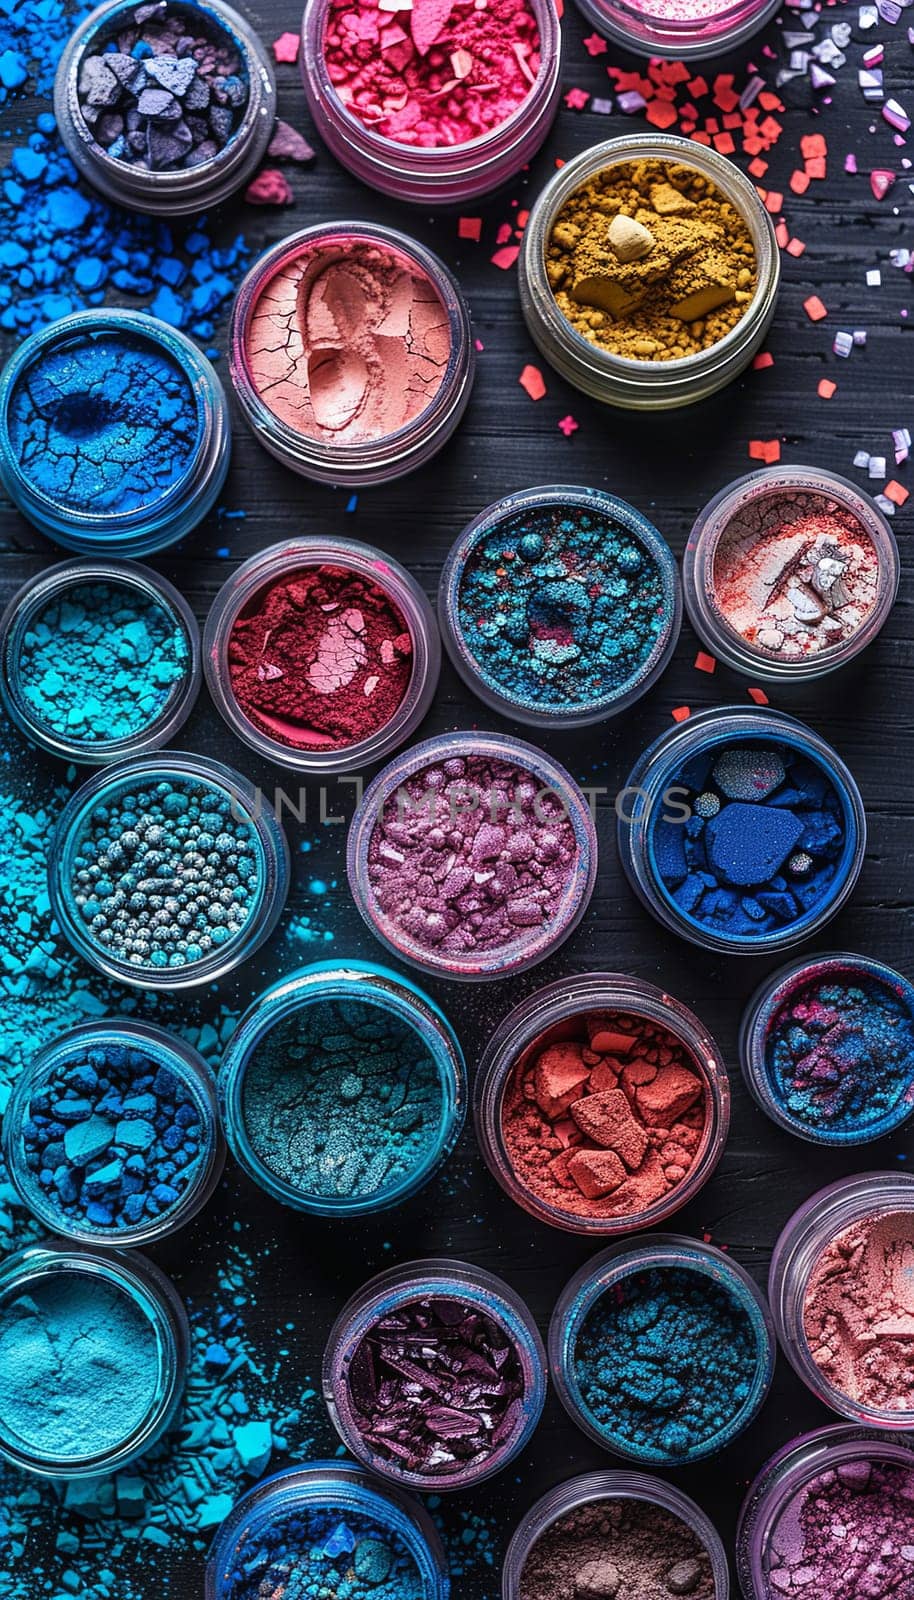 A variety of colorful makeup pigments and powders in small jars, arranged on a black surface.